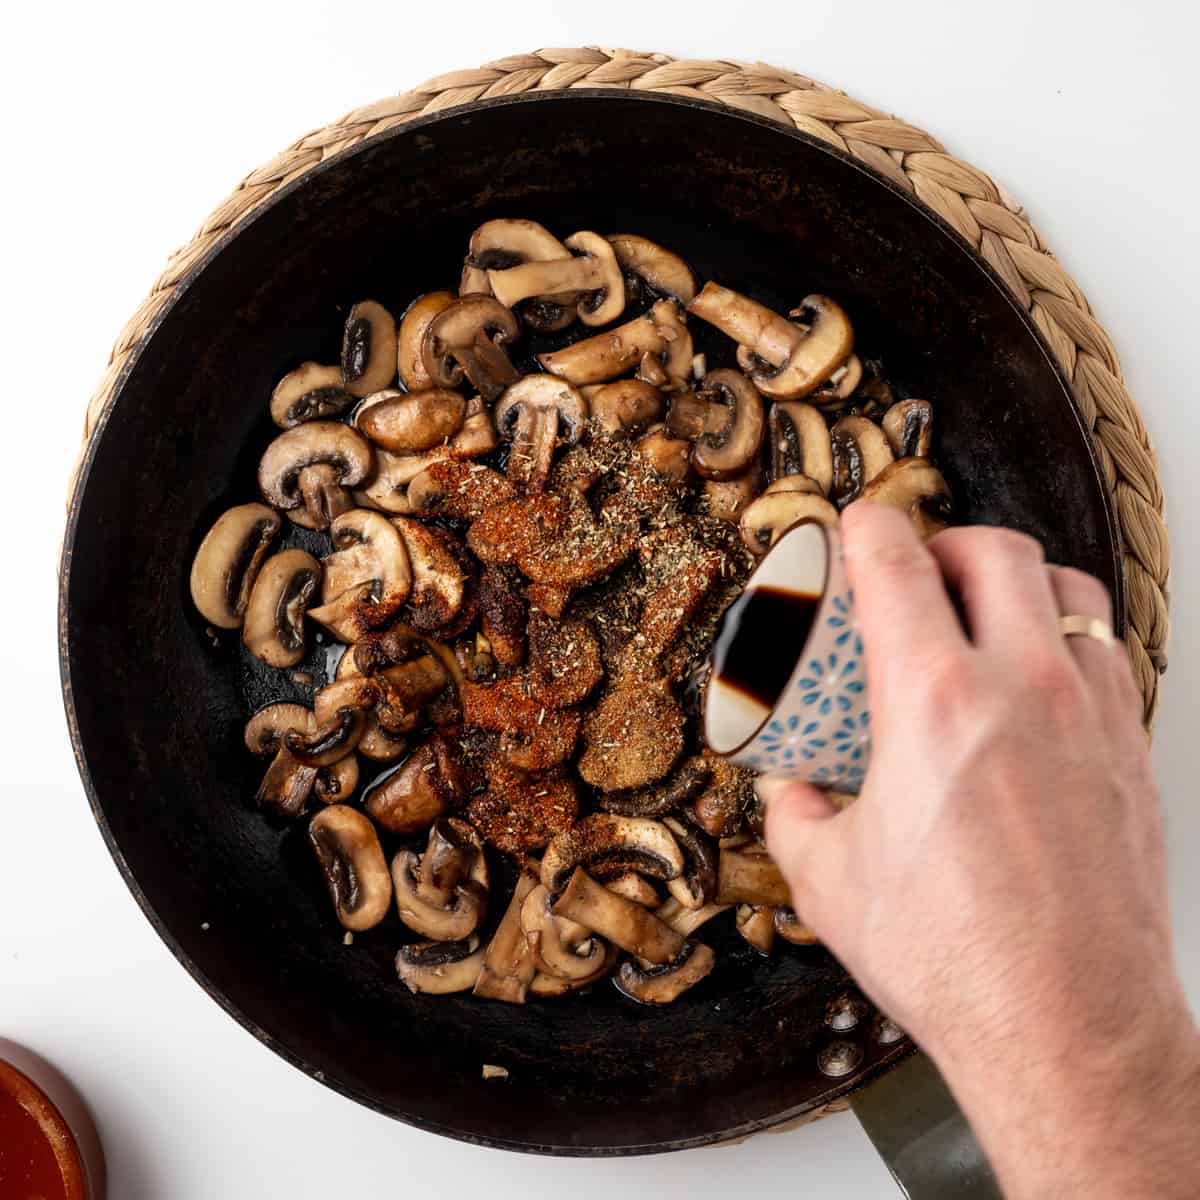 Adding spices, herbs and soy sauce to garlic and mushrooms in a skillet.